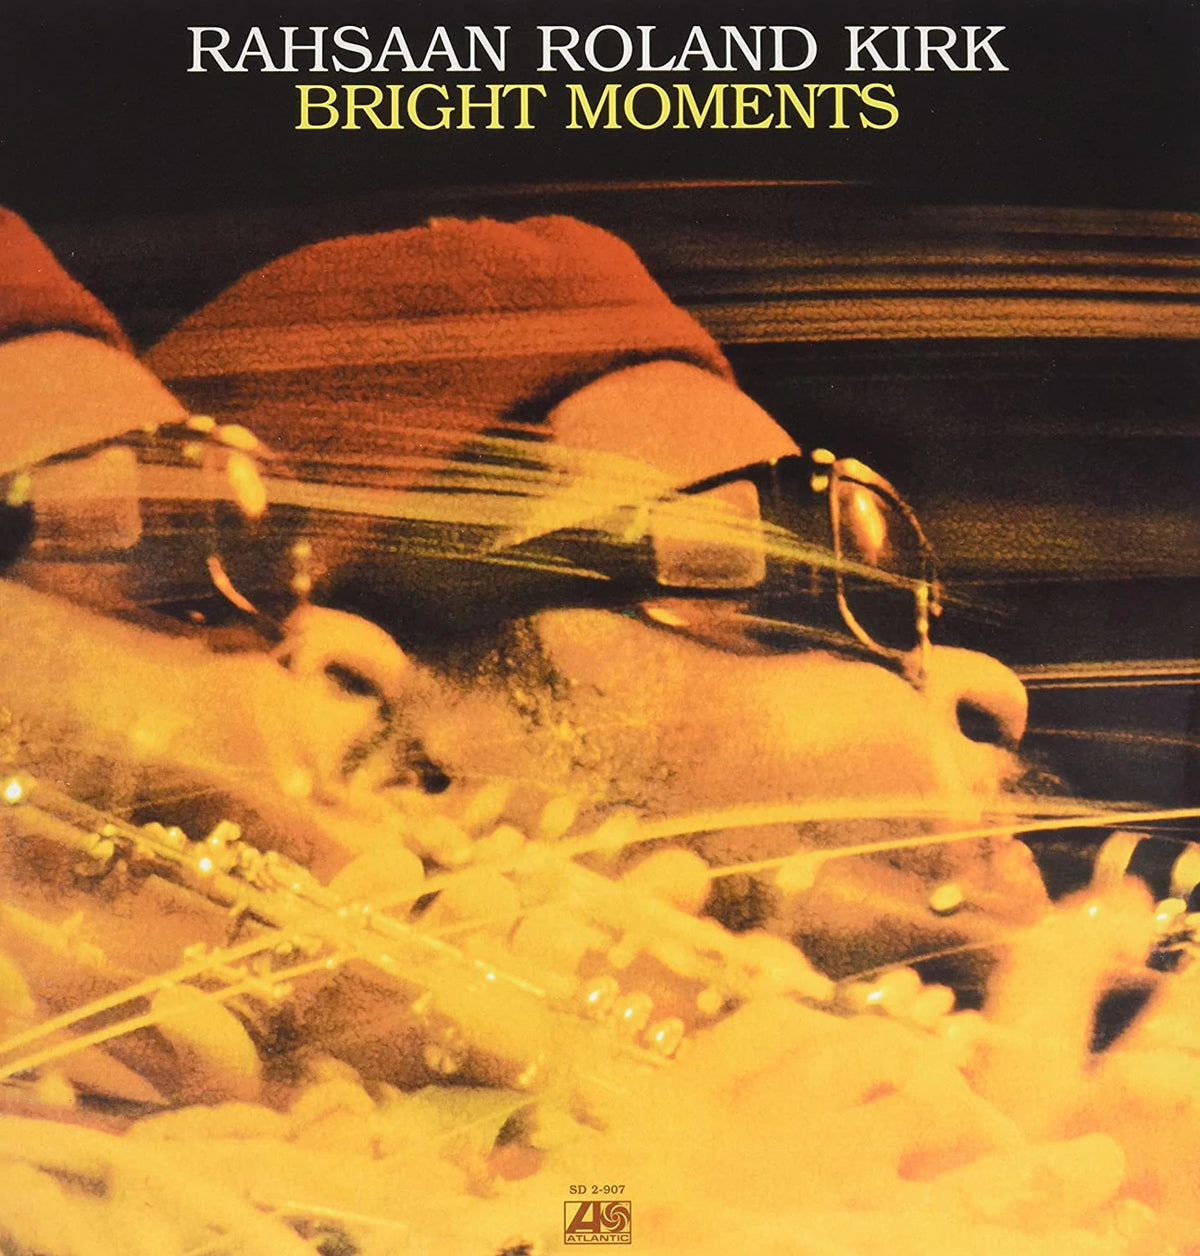 Rahsaan Roland Kirk - Bright Moments LP (180g, Audiophile, Remastered)